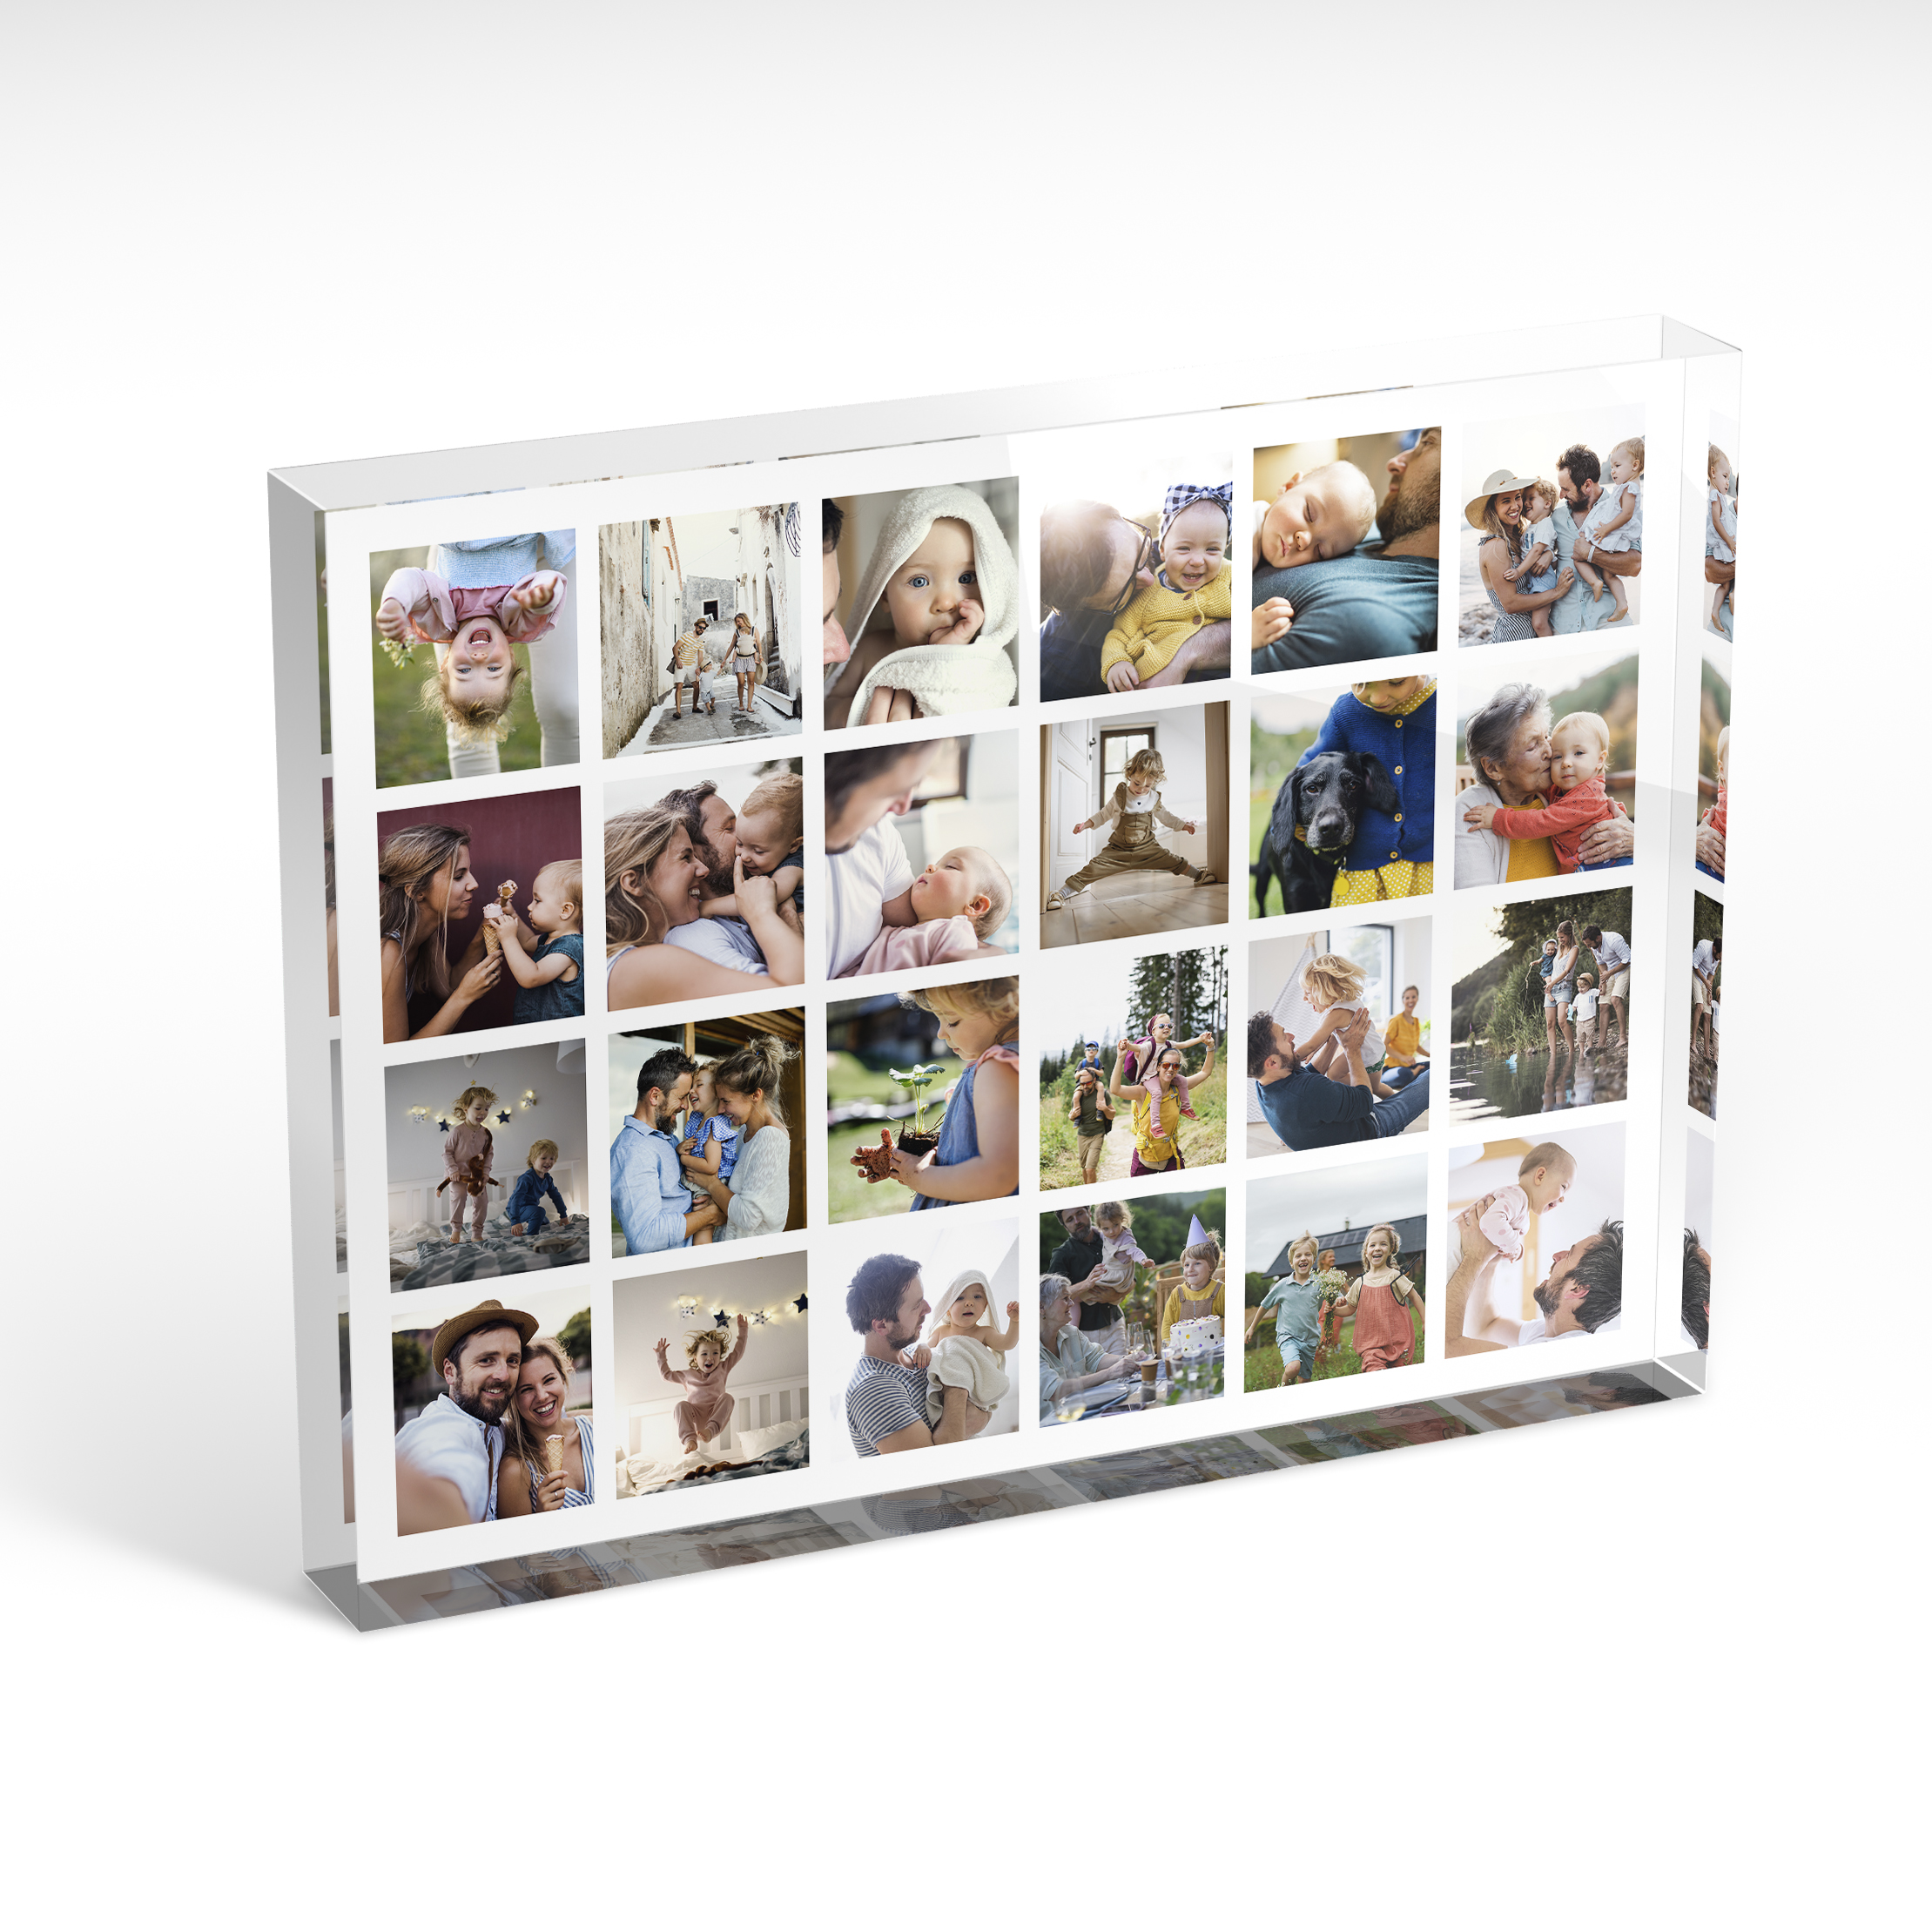 An angled side view of a landscape layout Online acrylic photo blocks with space for 10+ photos. Thiis design is named "Collage of Memories". 